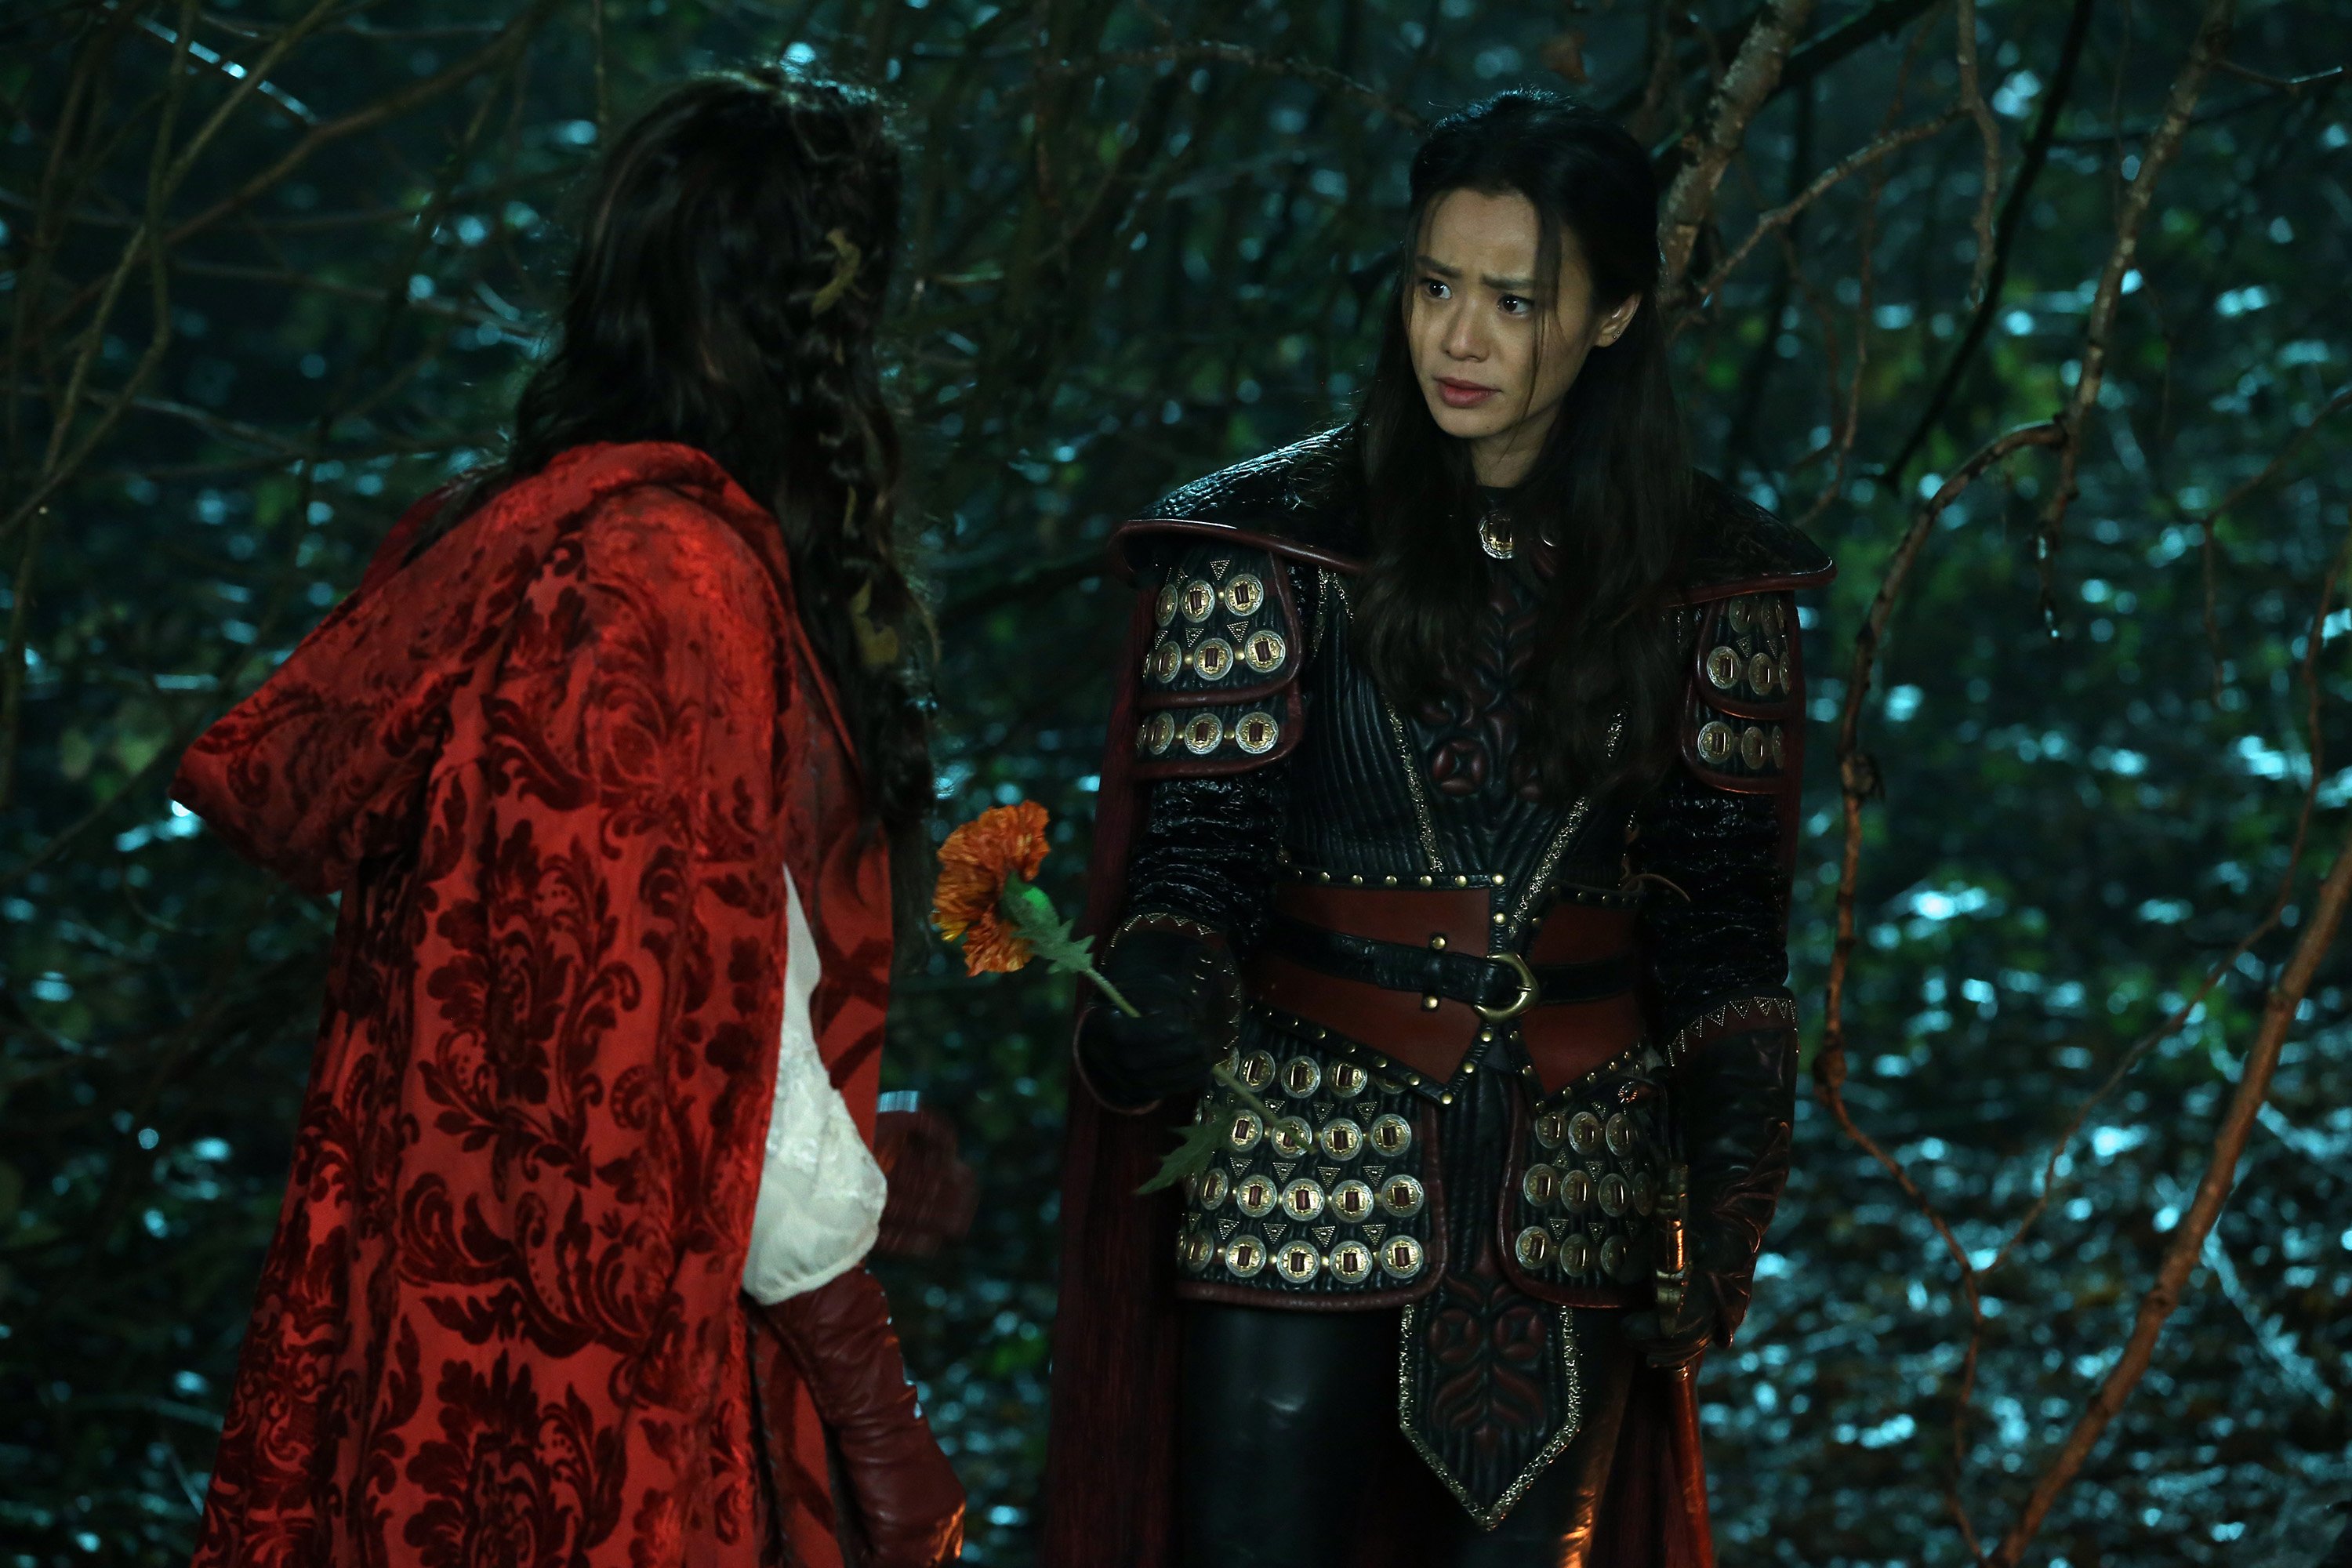 ABC's 'Once Upon a Time' Episode Titled 'Ruby Slippers'